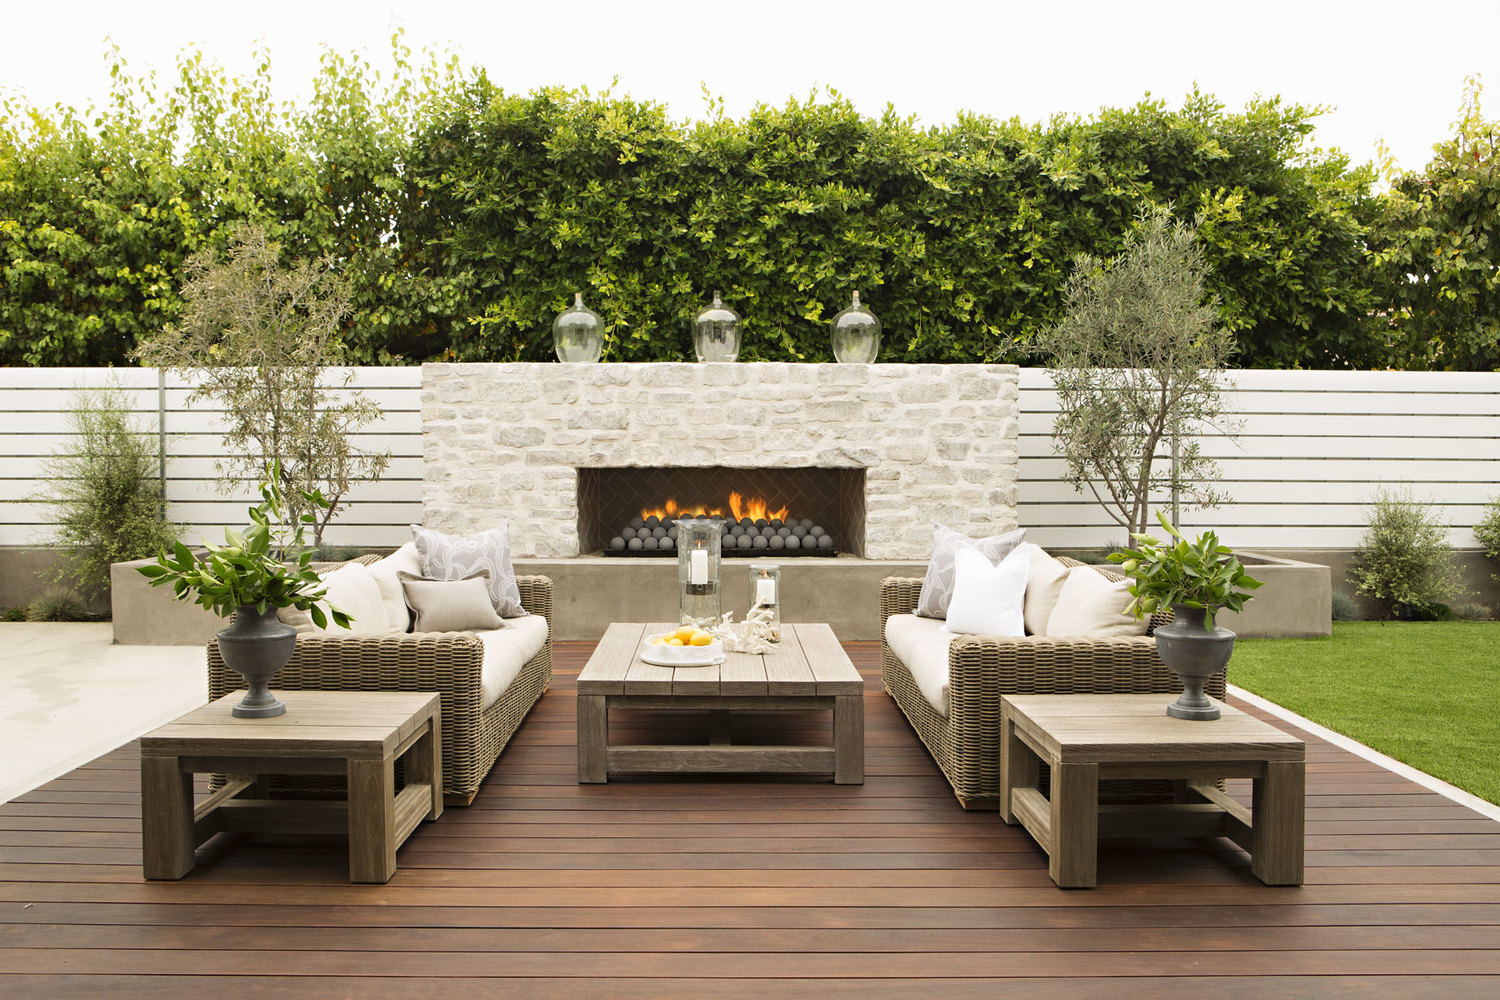 Modern NJ Ipe deck design with wood furniture, real white brick outdoor fireplace, wicker furniture